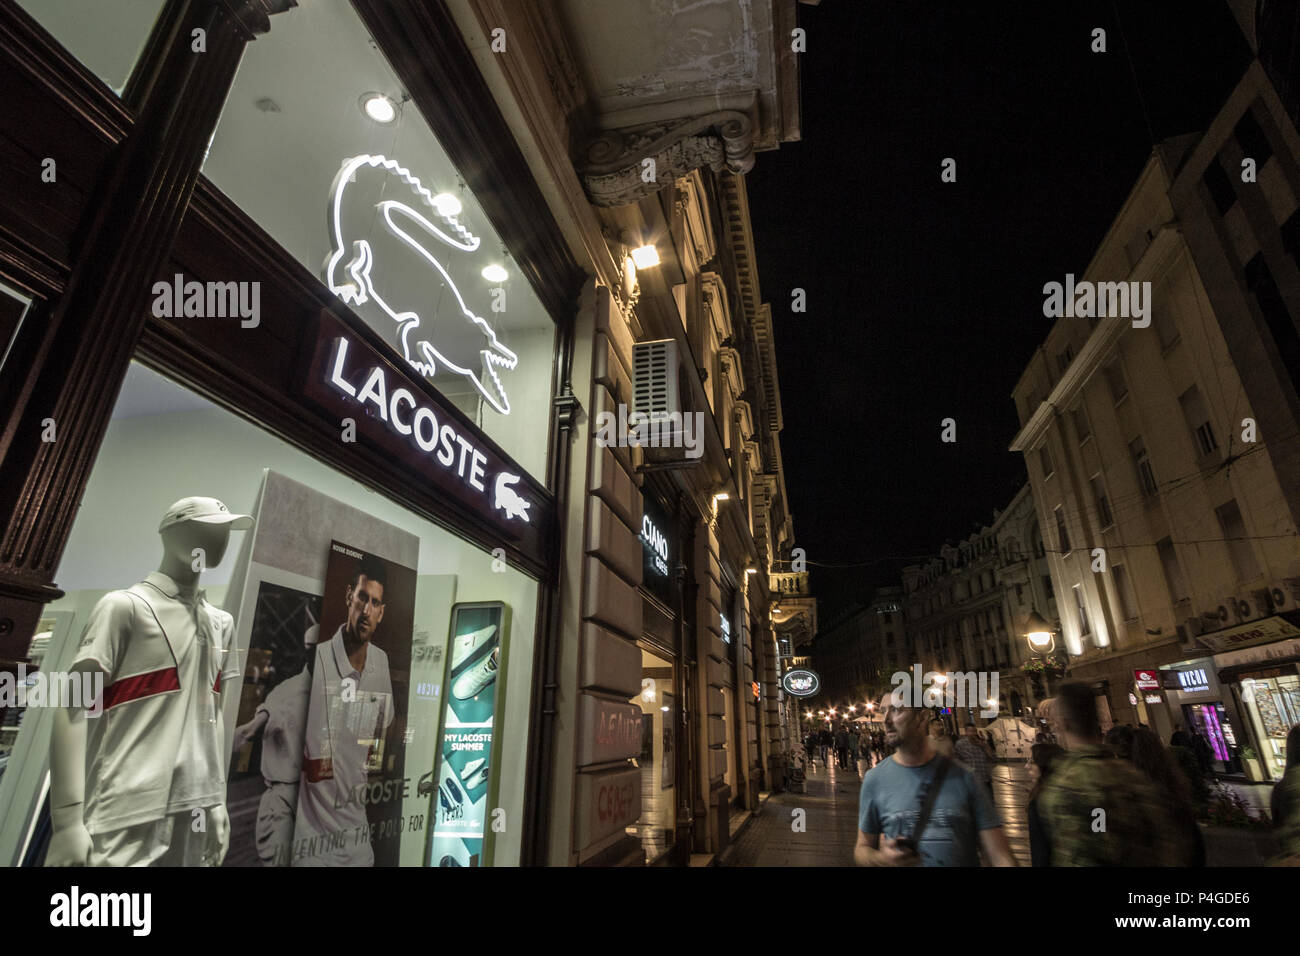 BELGRADE, SERBIA - JUNE 16, 2018: Logo of Lacoste on their main store for Belgrade. Lacoste is a French clothing company, selling clothing, footwear,  Stock Photo